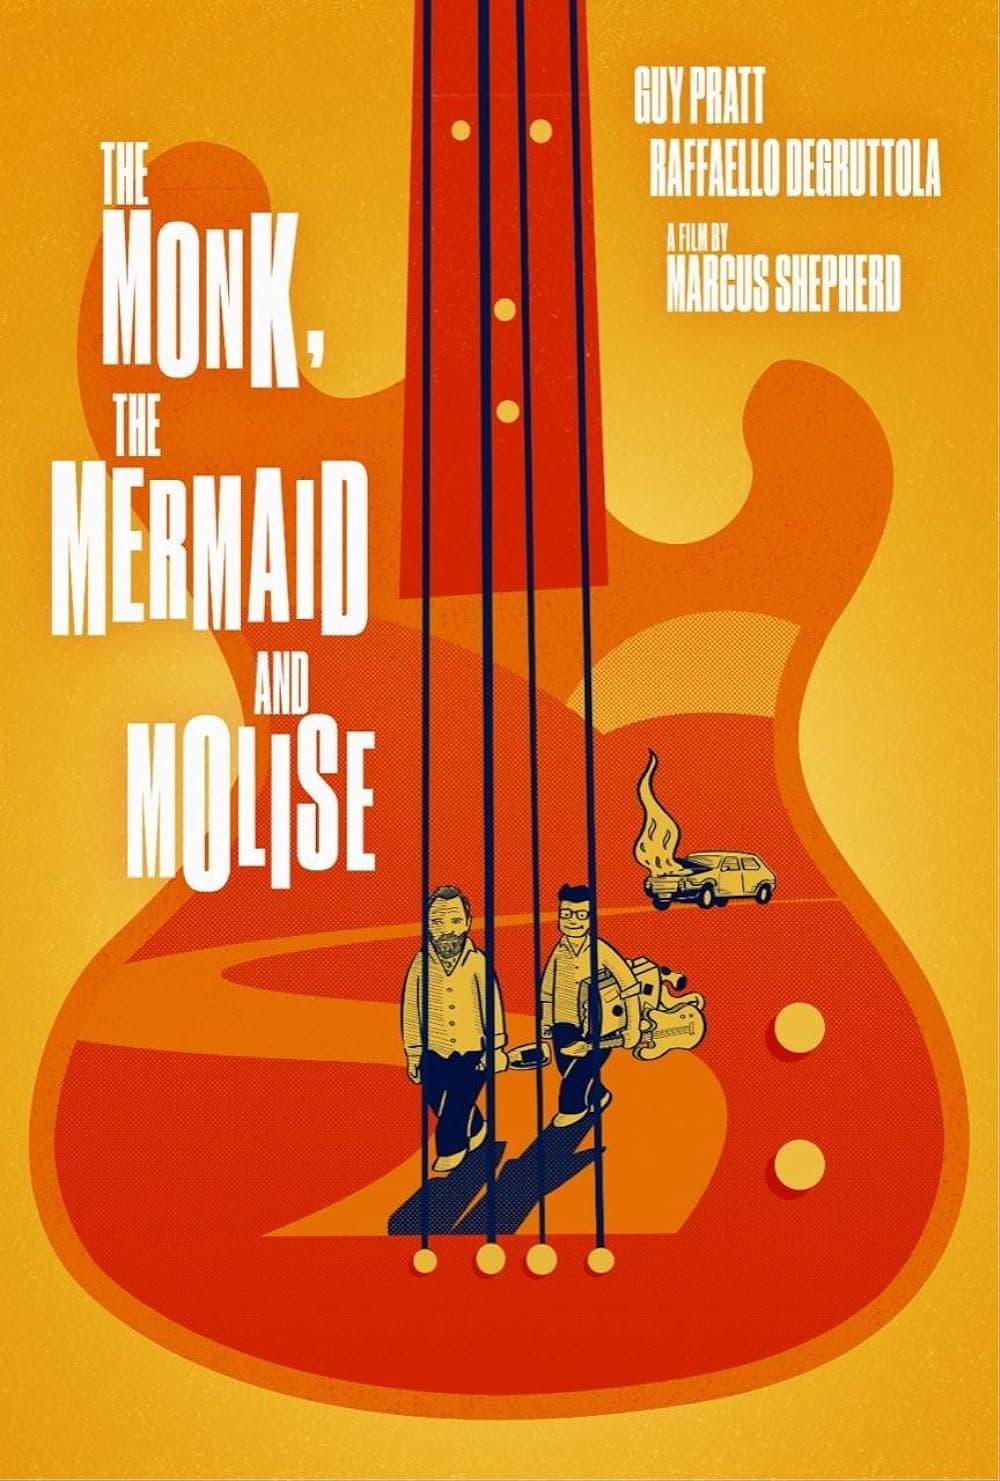 The Monk, The Mermaid & Molise poster